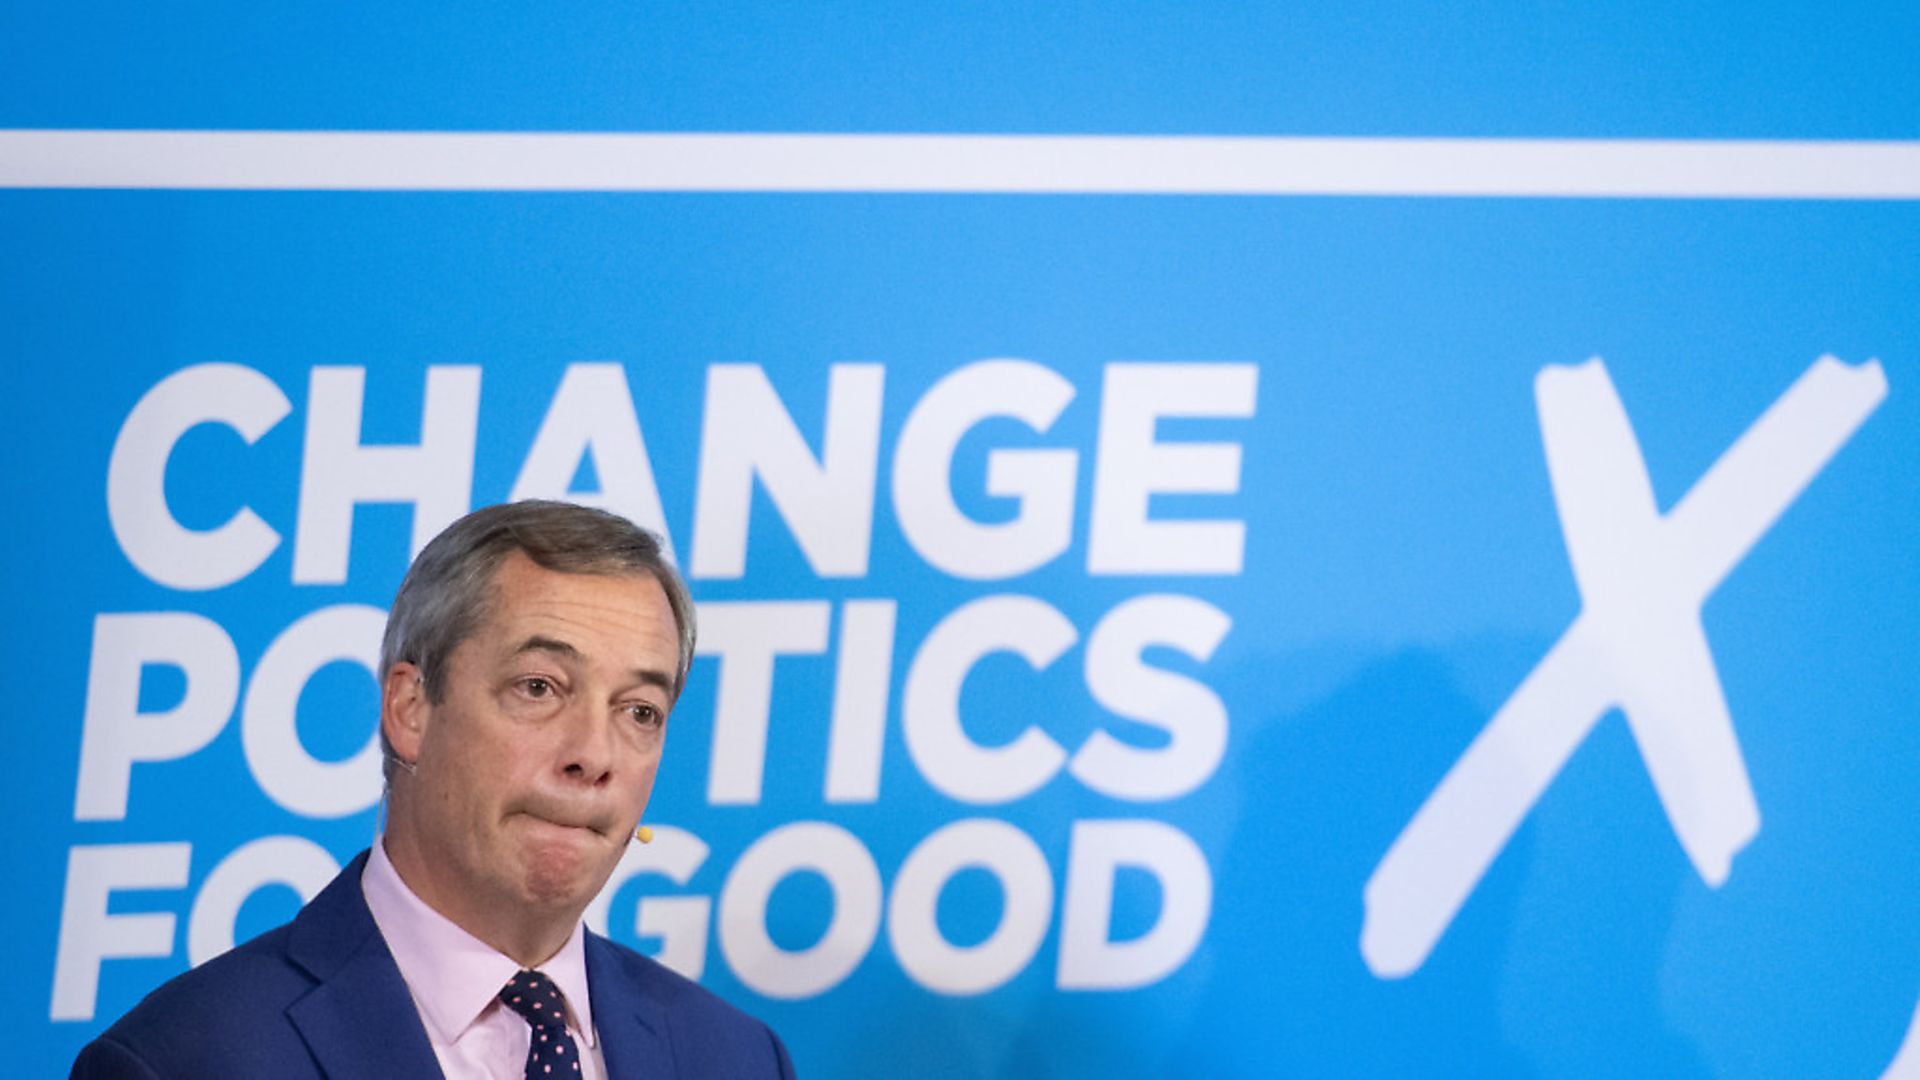 Brexit Party leader Nigel Farage during the general election campaign. Photograph: Dominic Lipinski/PA. - Credit: PA Wire/PA Images